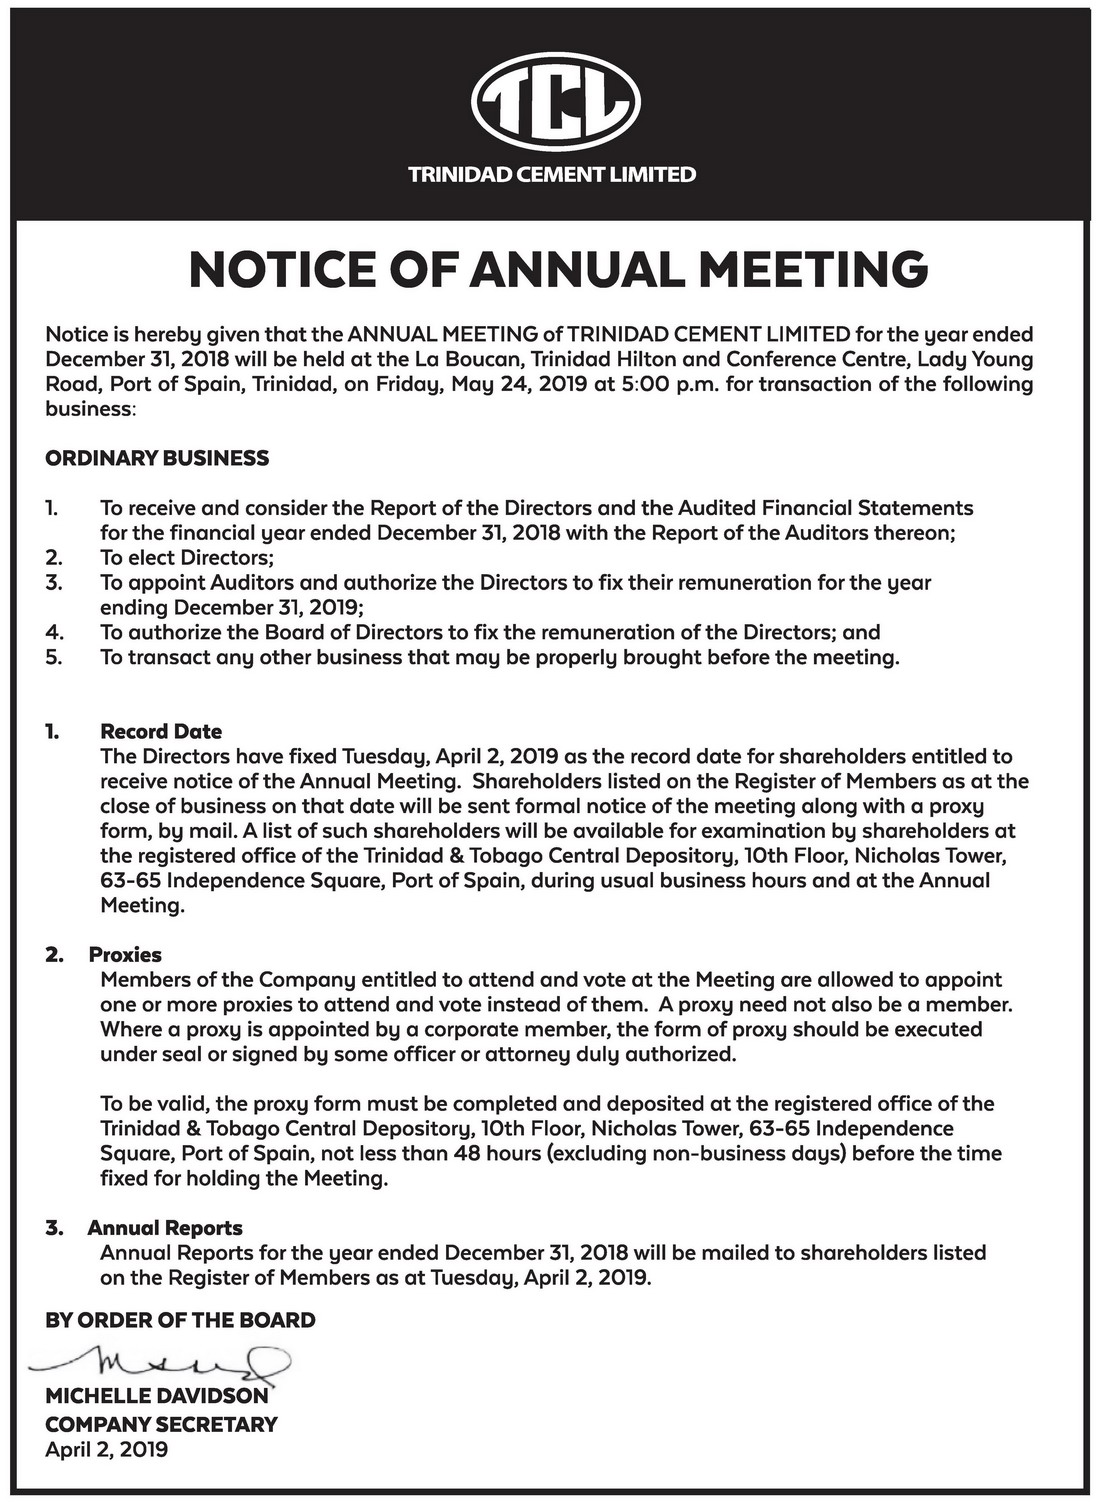 TCL-NOTICE-OF-ANNUAL-MEETING-20x4-ad-FAW